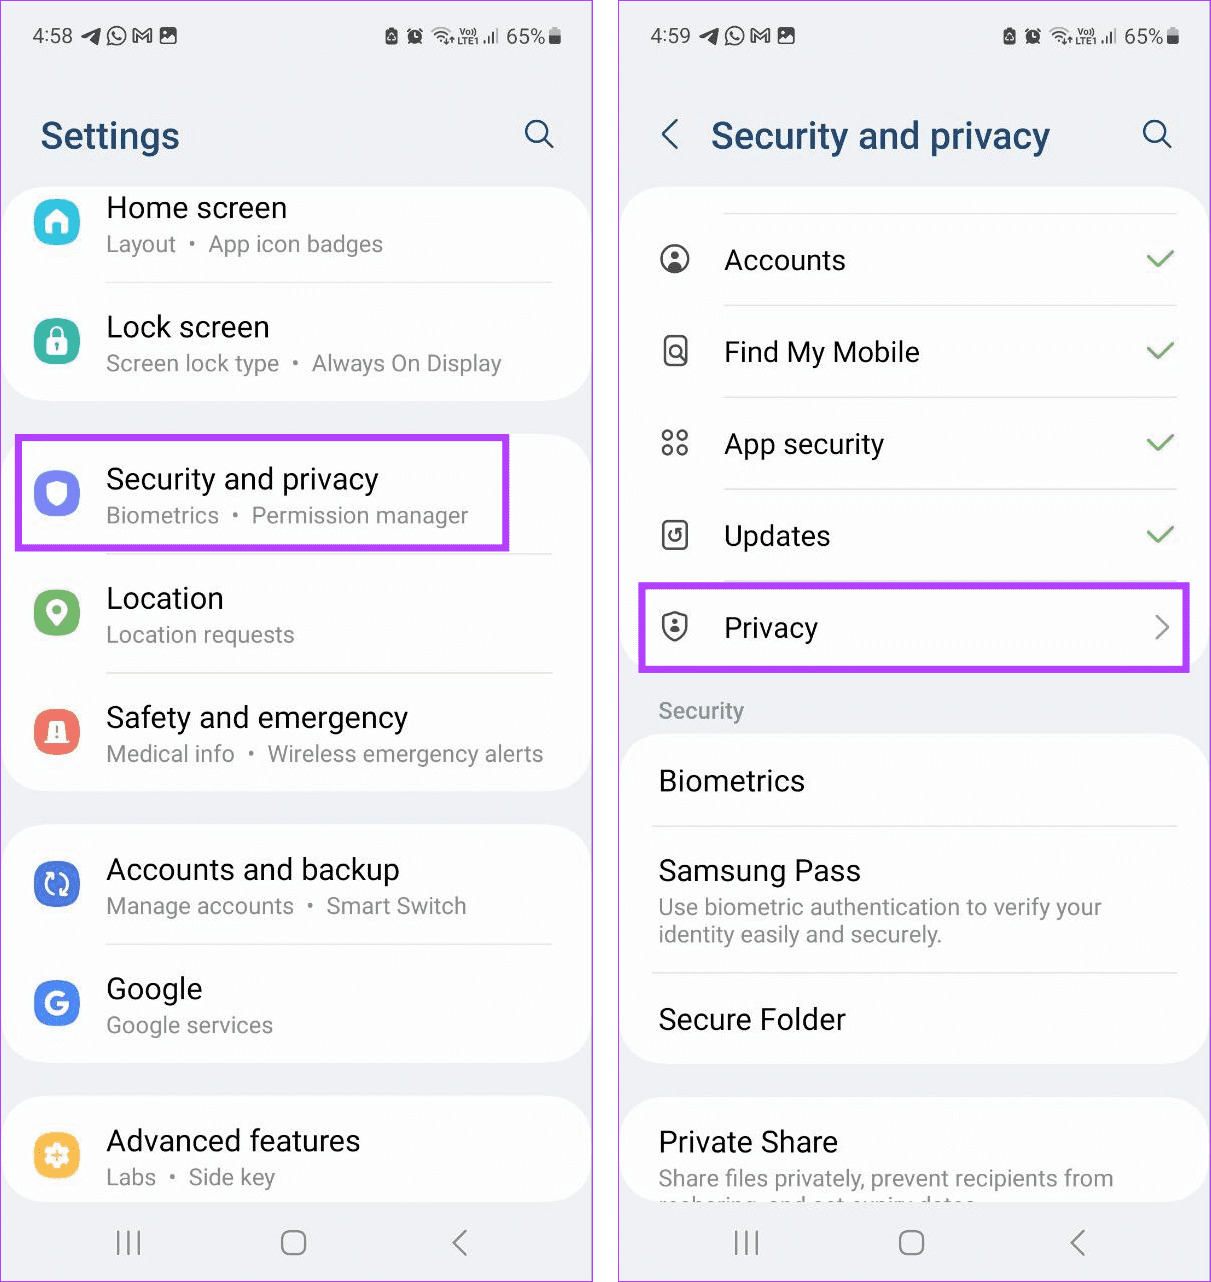 Open Privacy settings